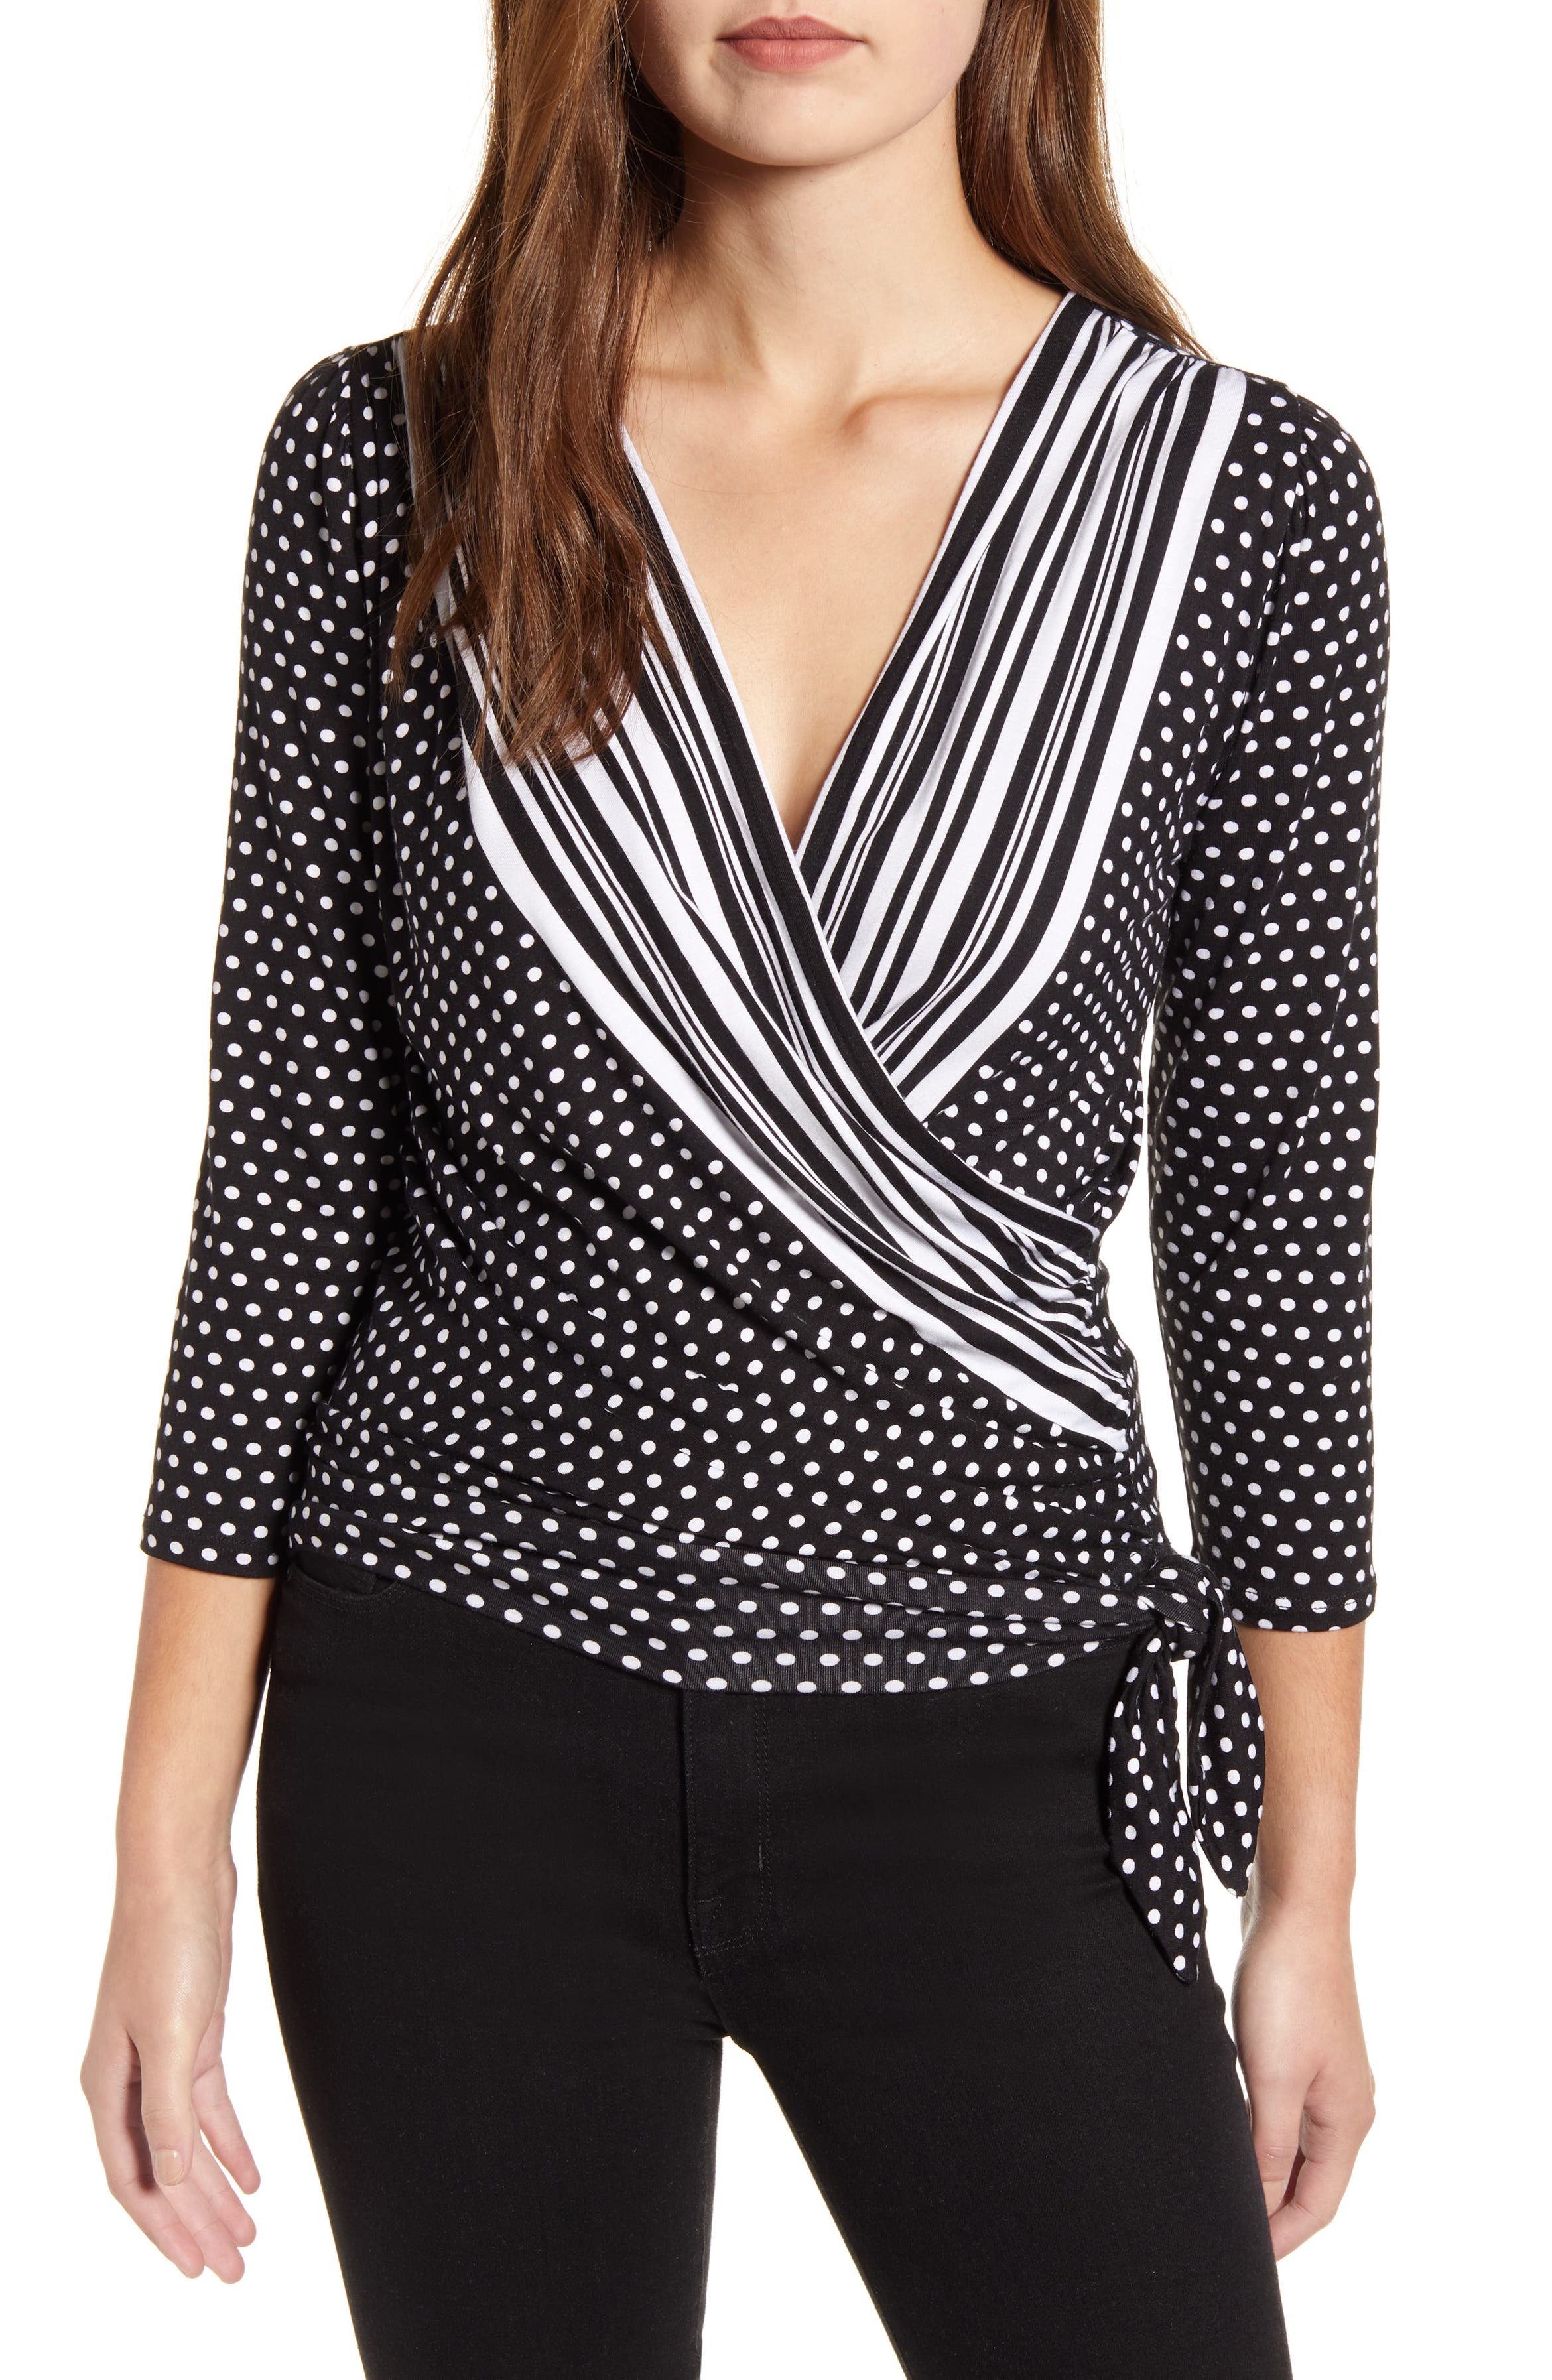 Loveapella Mixed Print Faux Wrap Top | Nordstrom